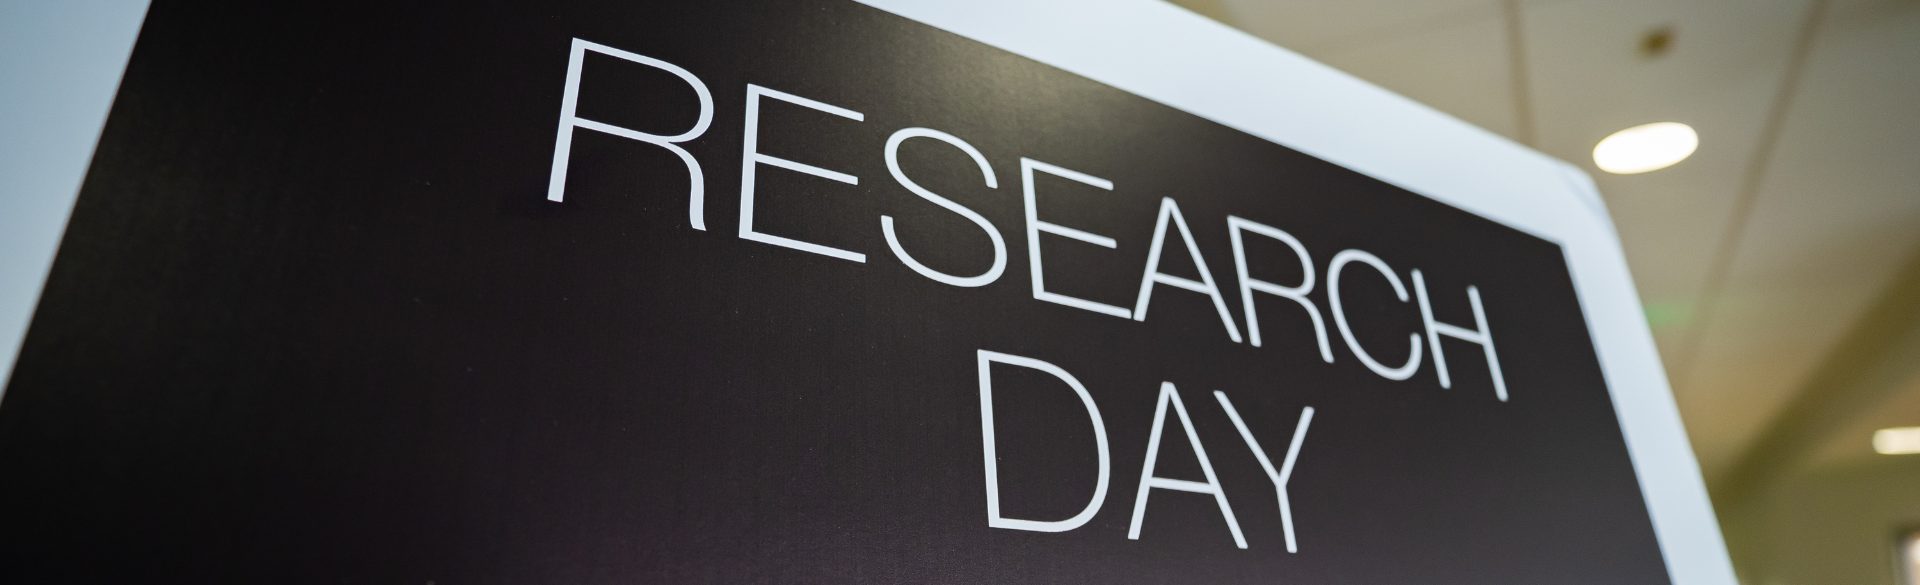 Research Day banner